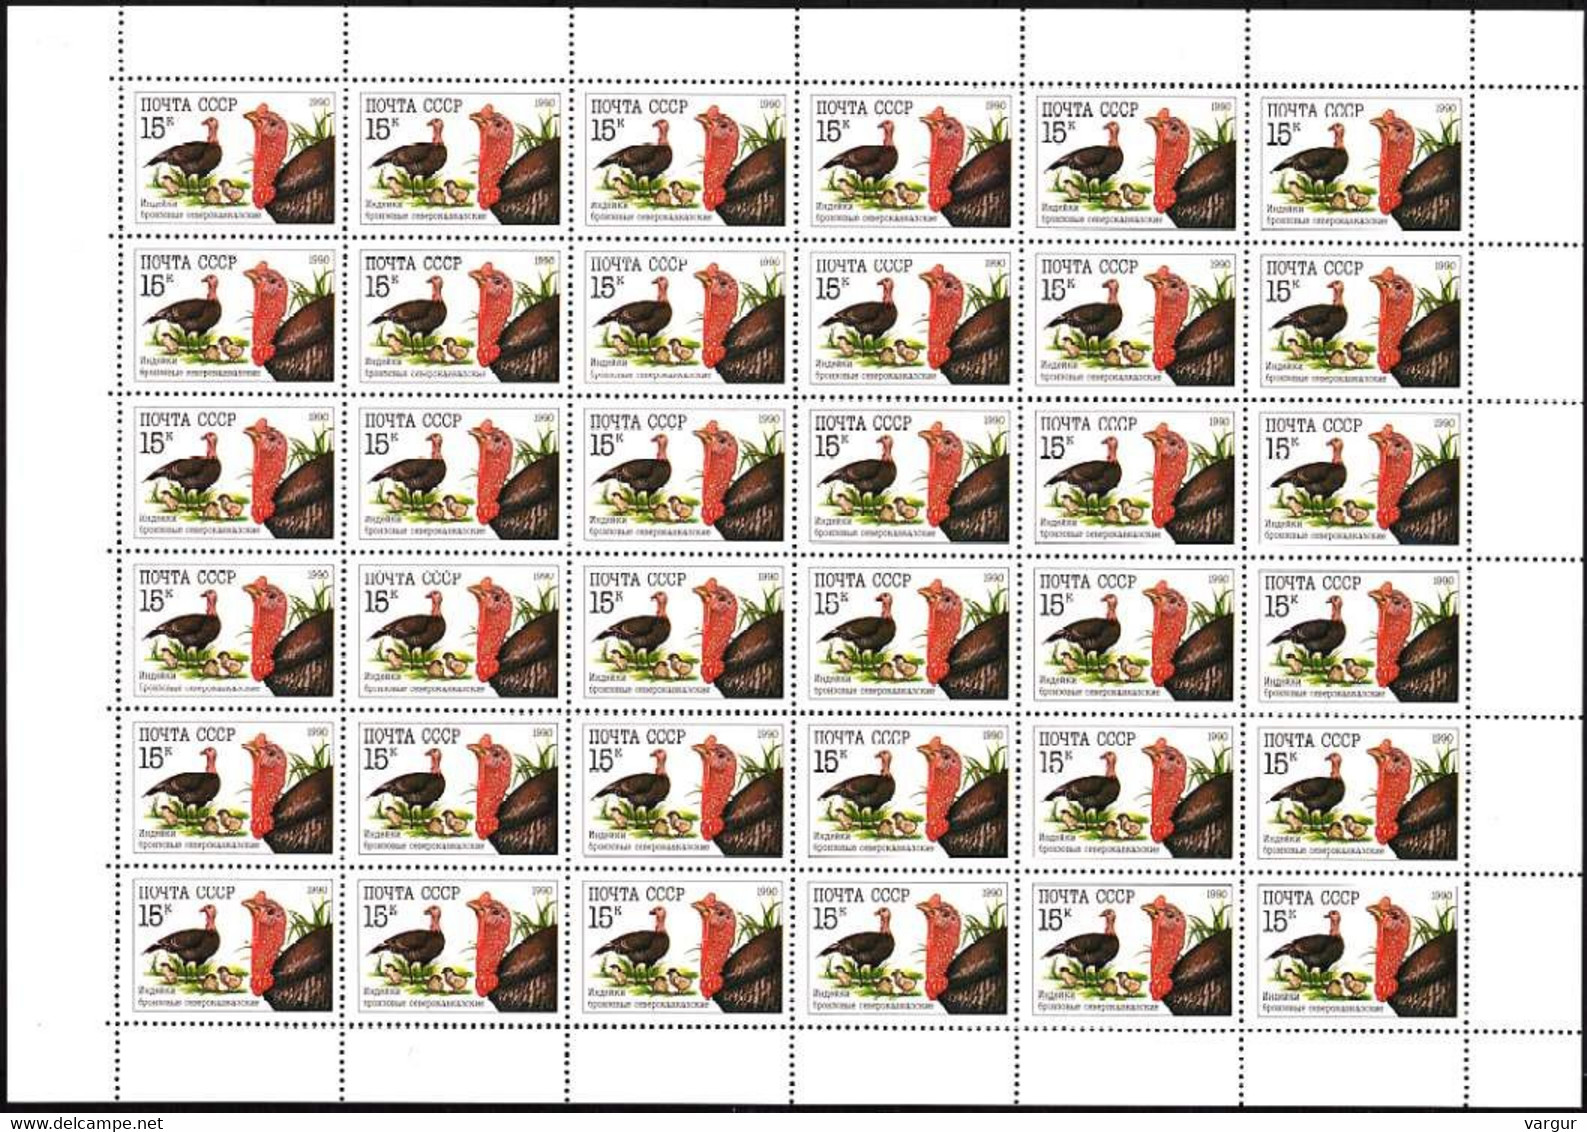 RUSSIA/USSR 1990 FAUNA: Poultry / Farm Birds. 3 FULL SHEETS, MNH - Oies